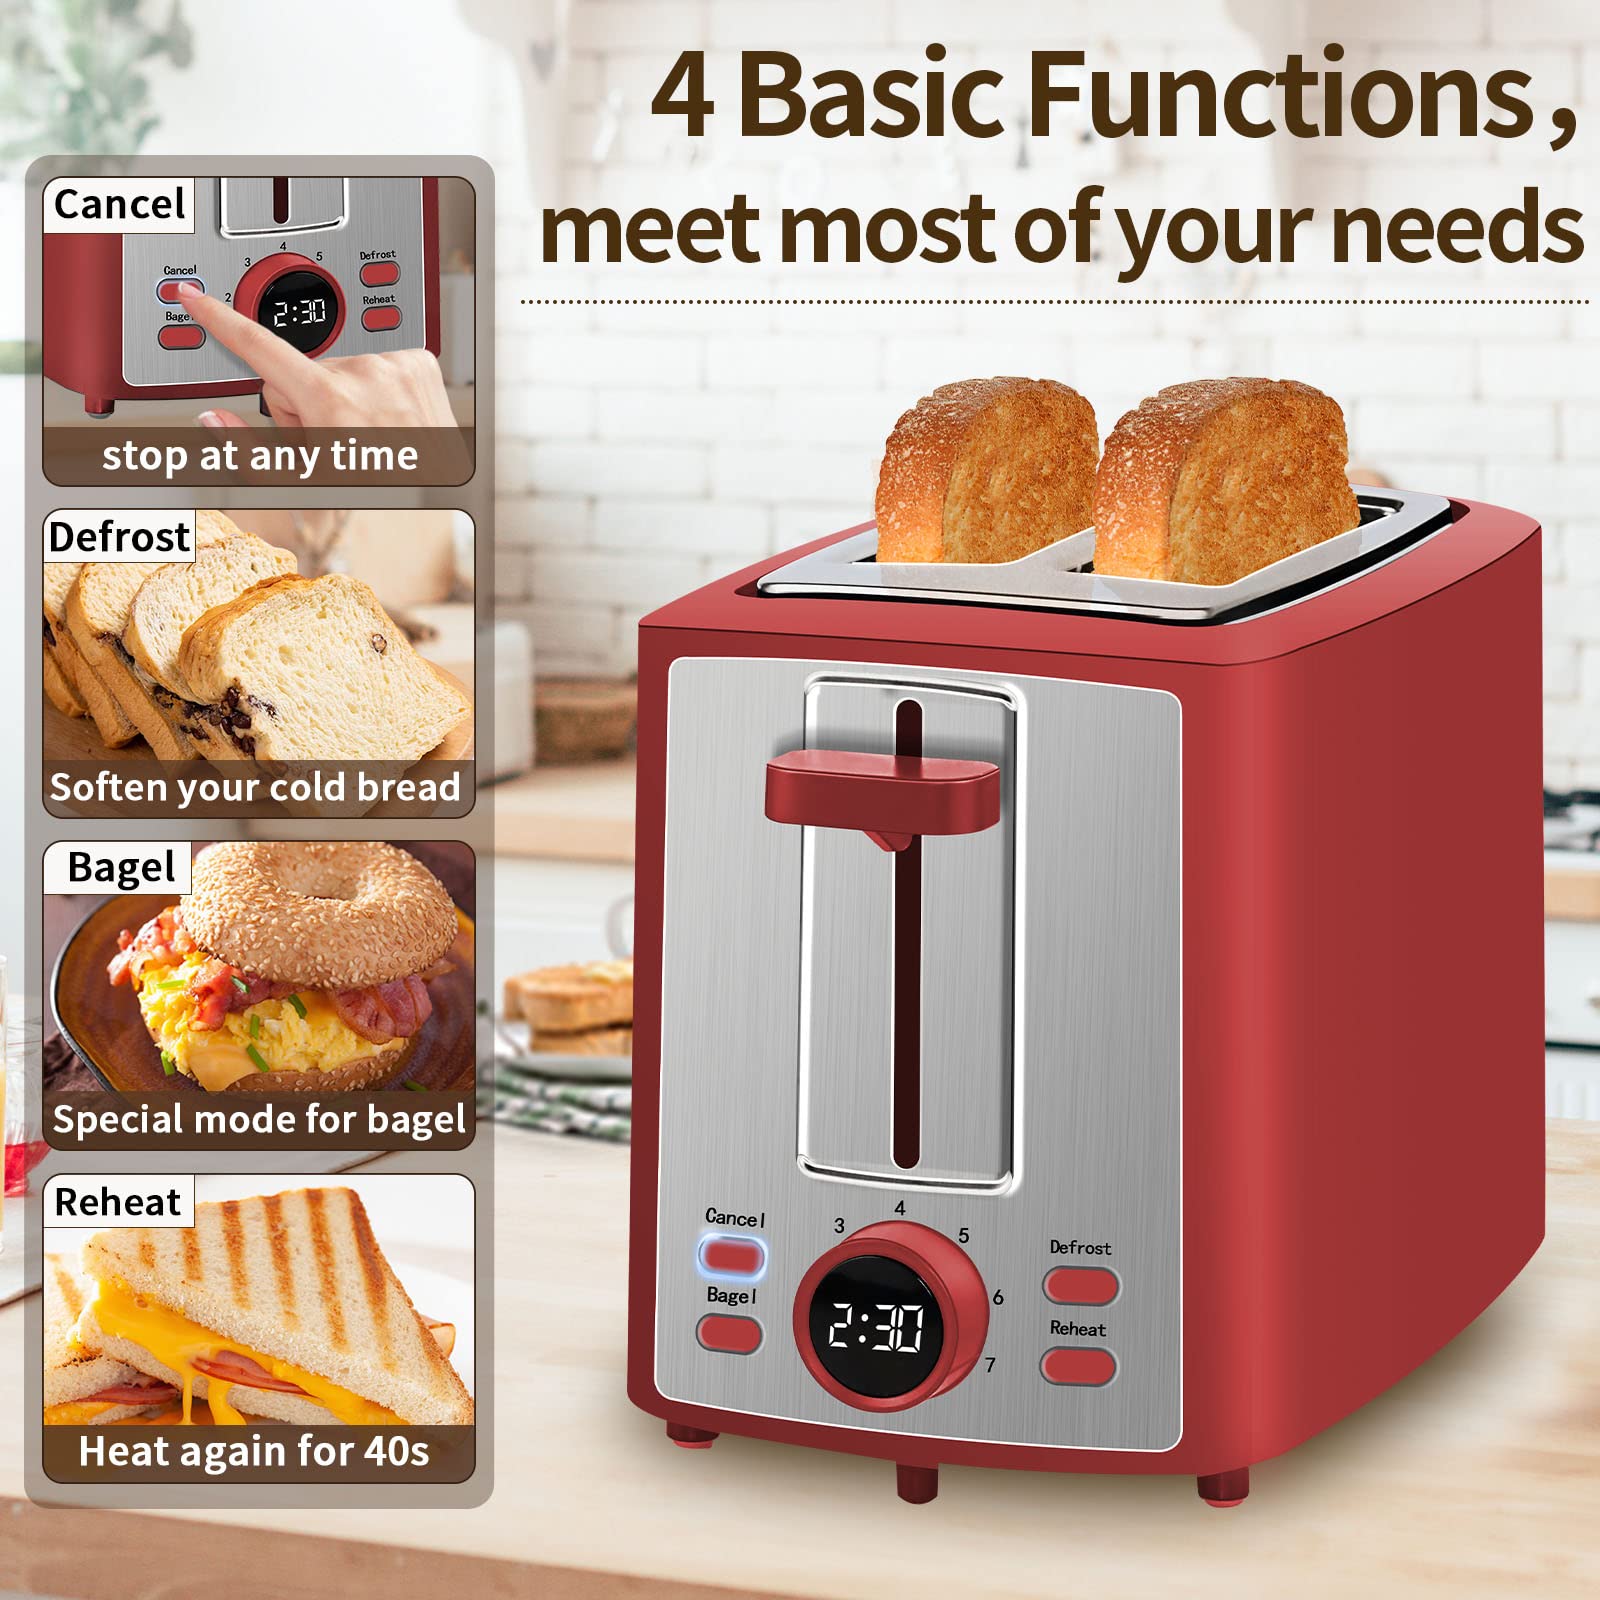 SEEDEEM Toaster 2 Slice, Bread Toaster with LCD Display, 7 Shade Settings, 1.４'' Variable Extra Wide Slots Toaster with Cancel, Bagel, Defrost, Reheat Functions, Removable Crumb Tray, 900W, Retro Red